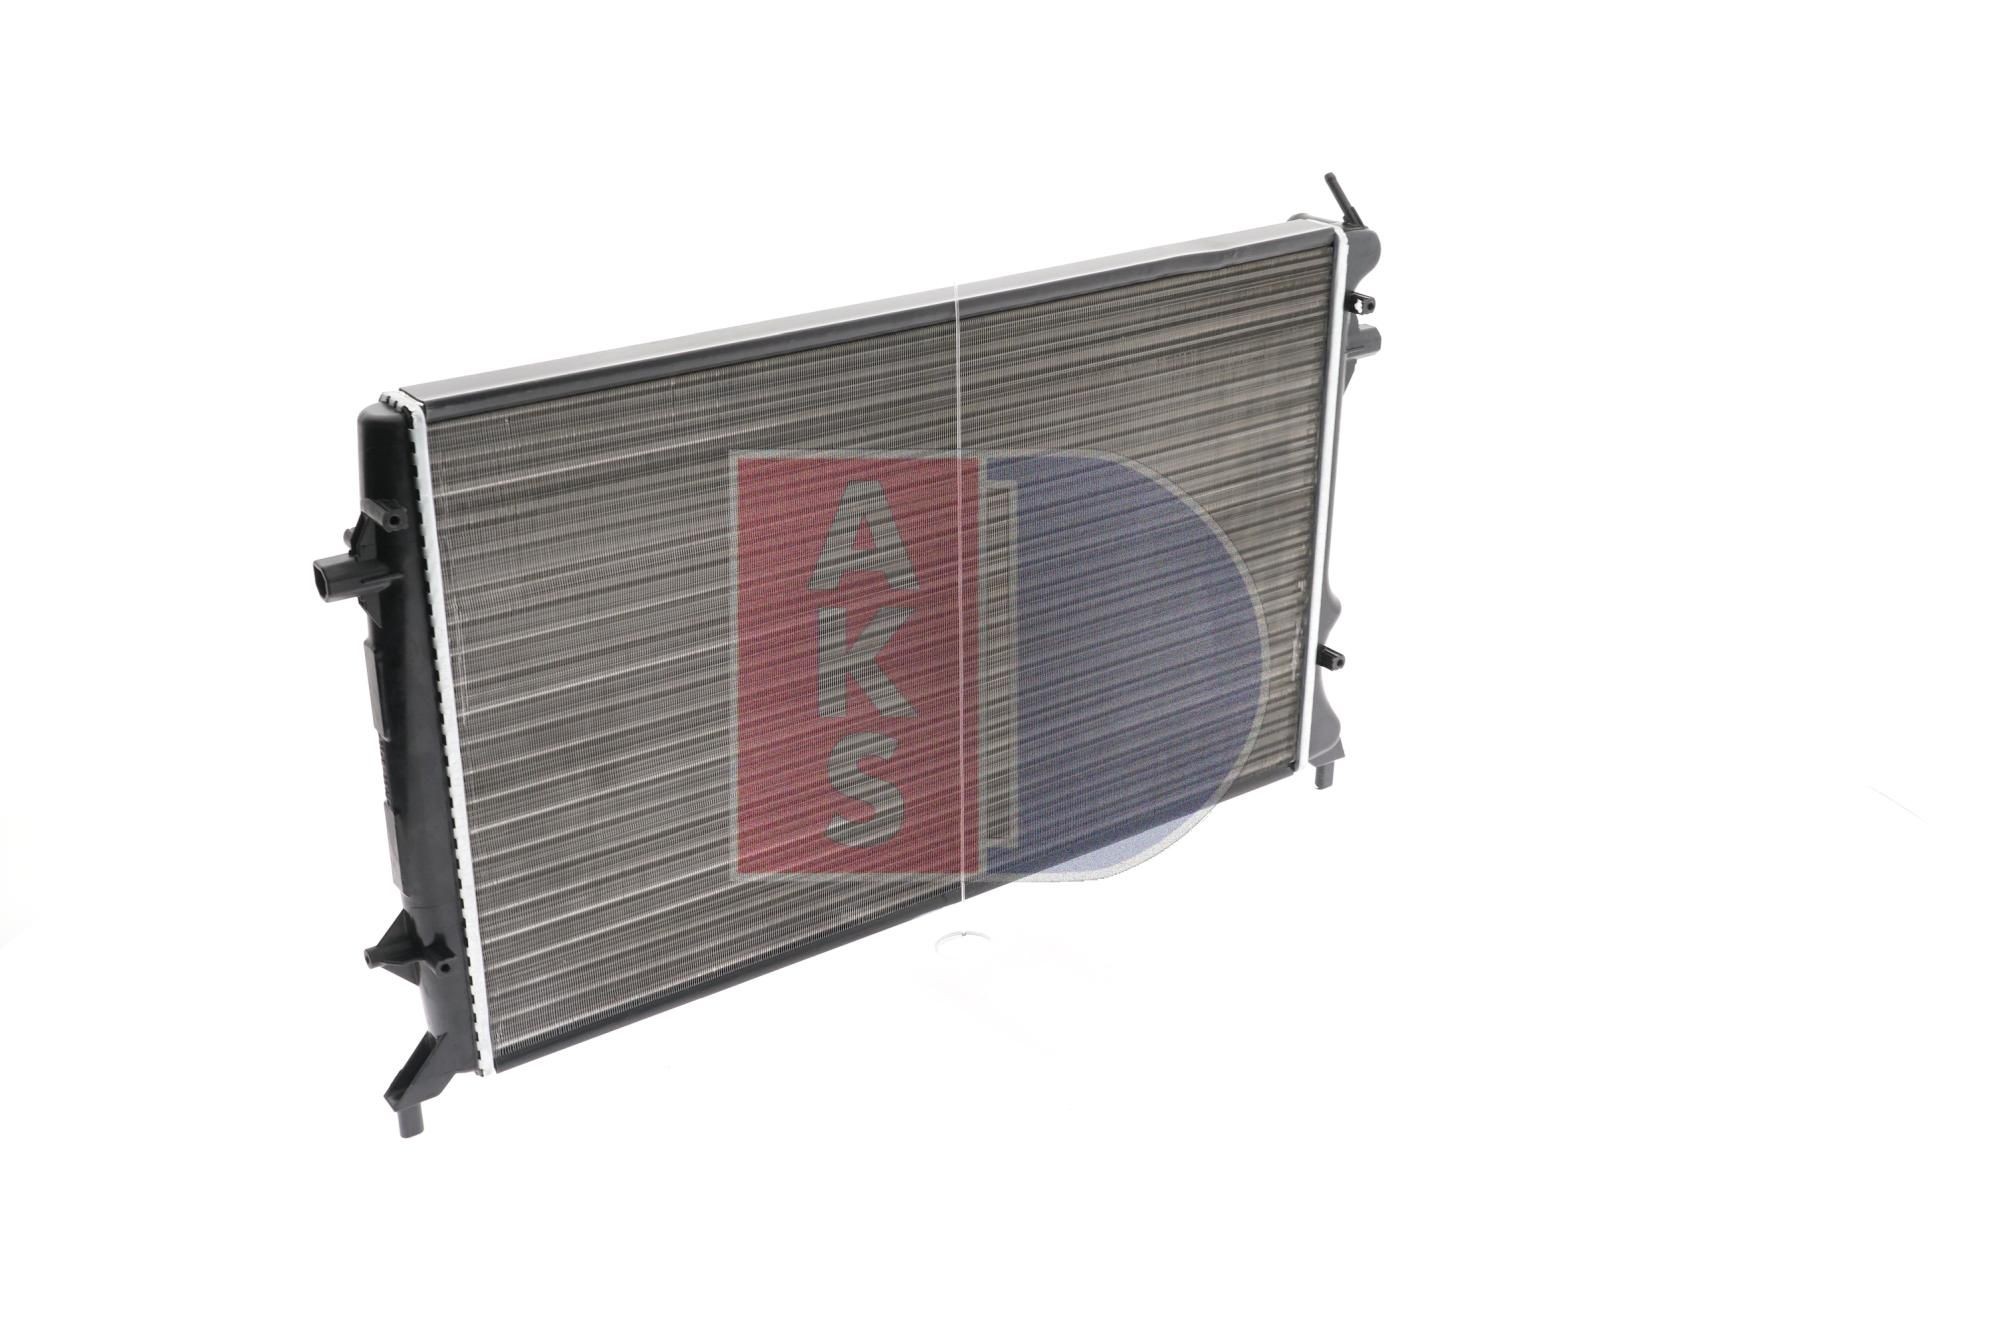 040049N Radiator 040049N AKS DASIS for vehicles with/without air conditioning, 650 x 416 x 34 mm, Manual Transmission, Mechanically jointed cooling fins